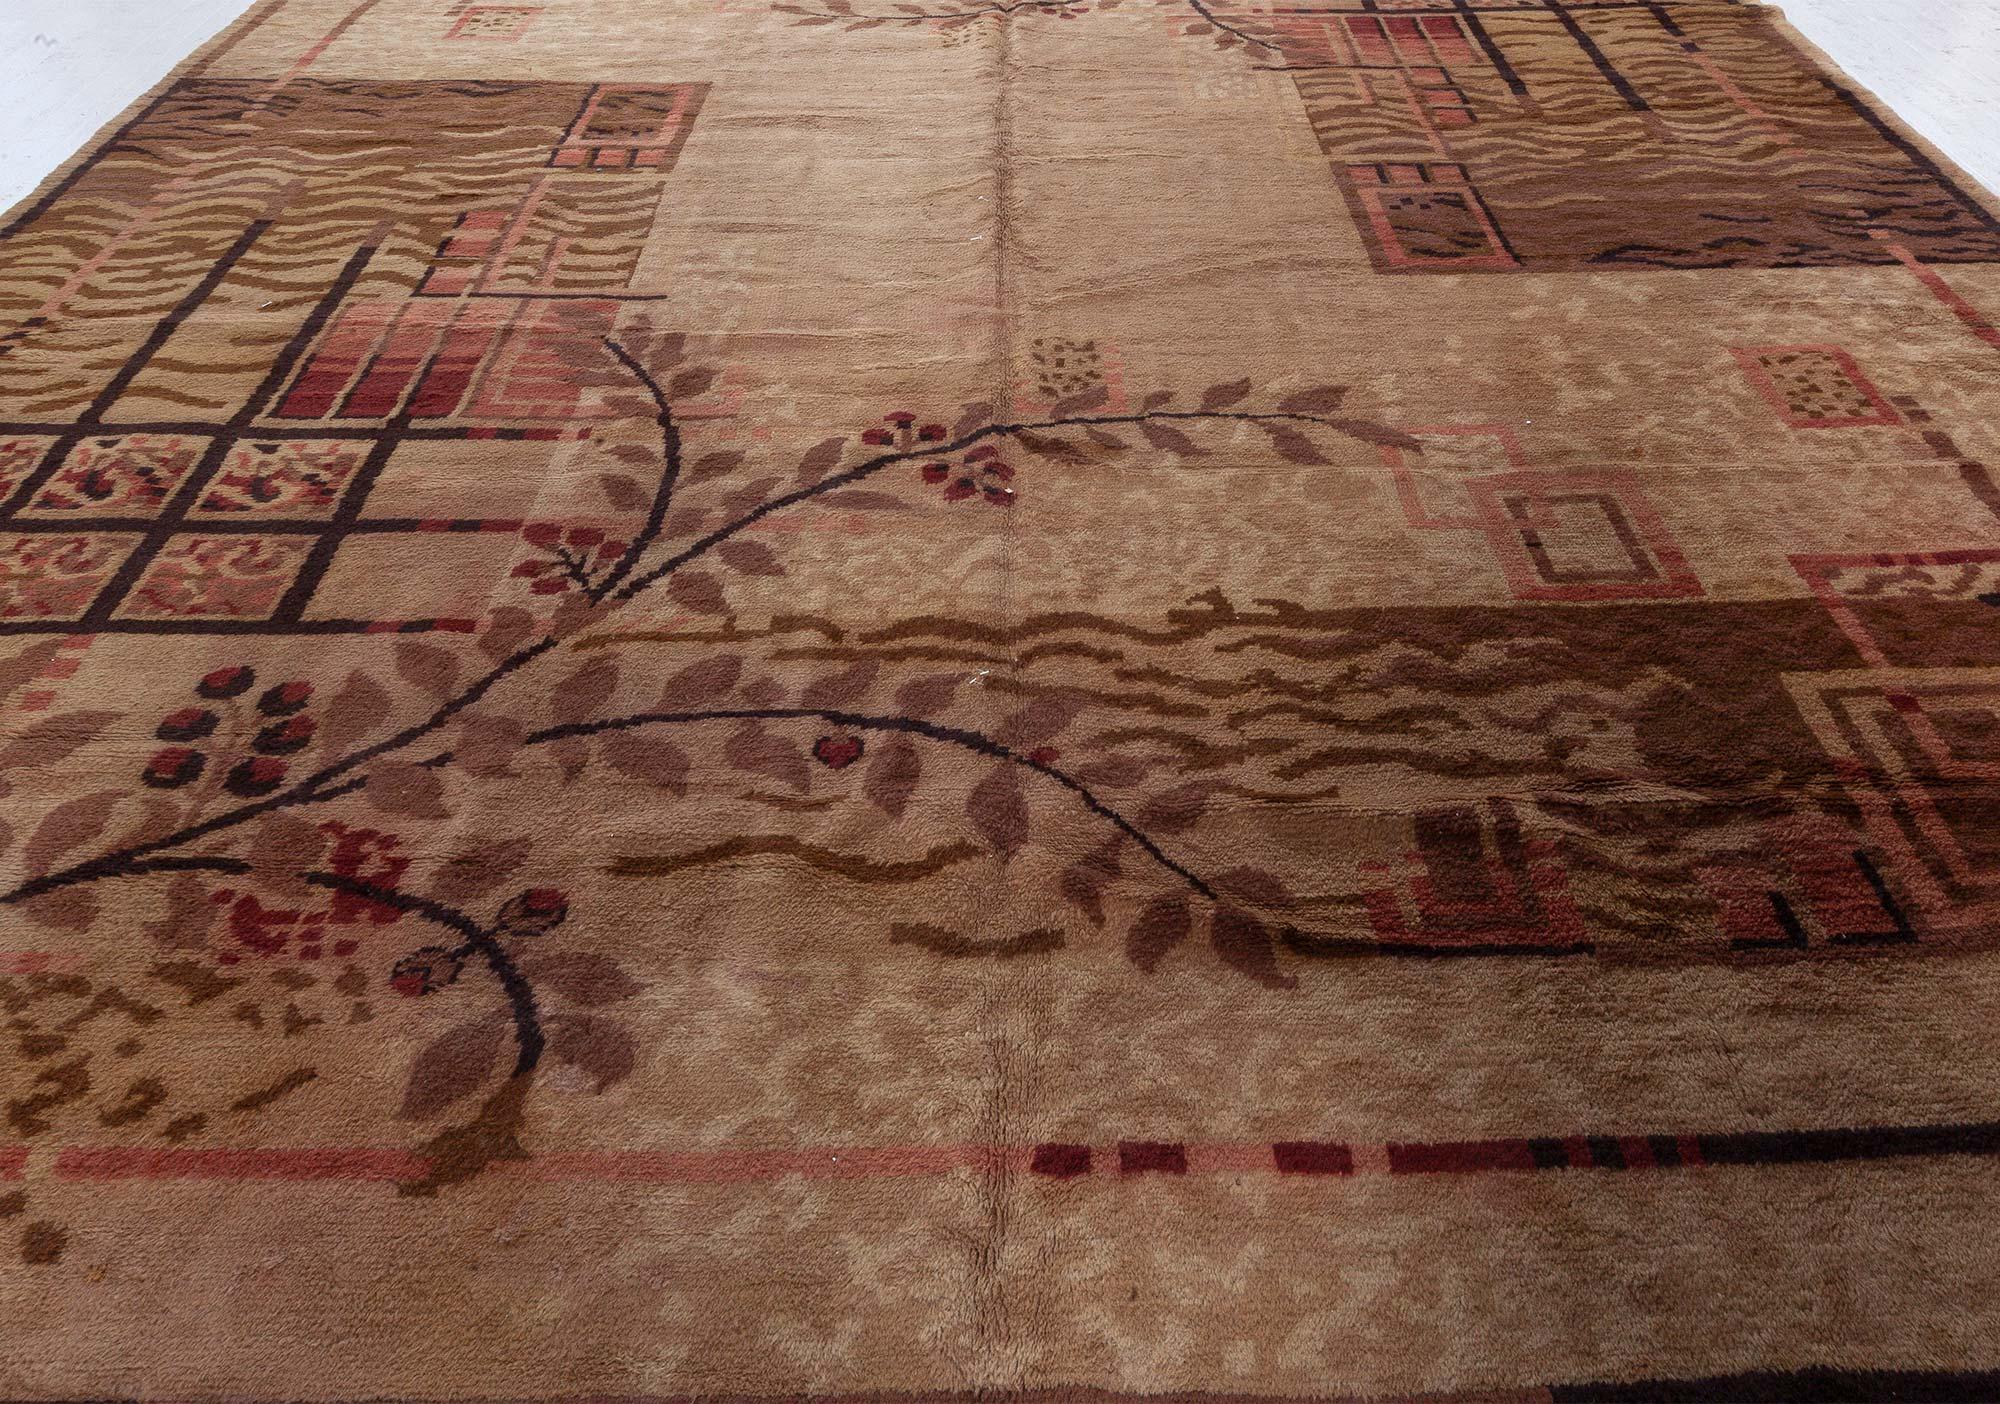 Authentic French Art Deco brown handwoven wool rug
Size: 11'6